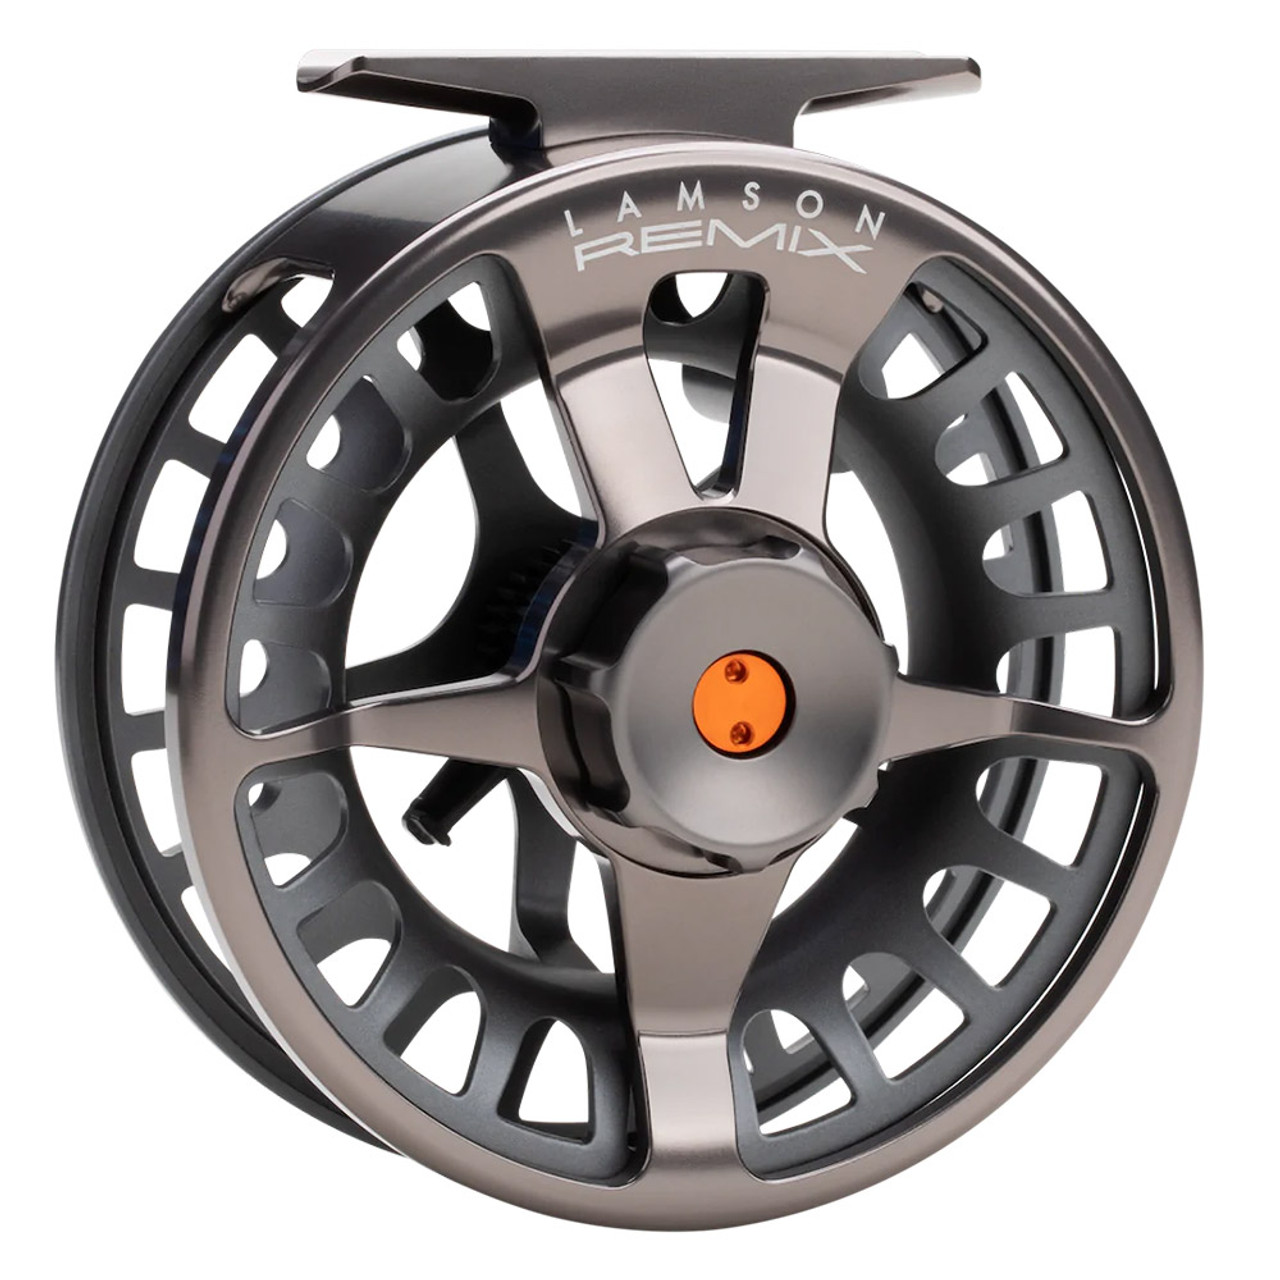 Waterworks Lamson Remix Fly Reel - Armadale Angling